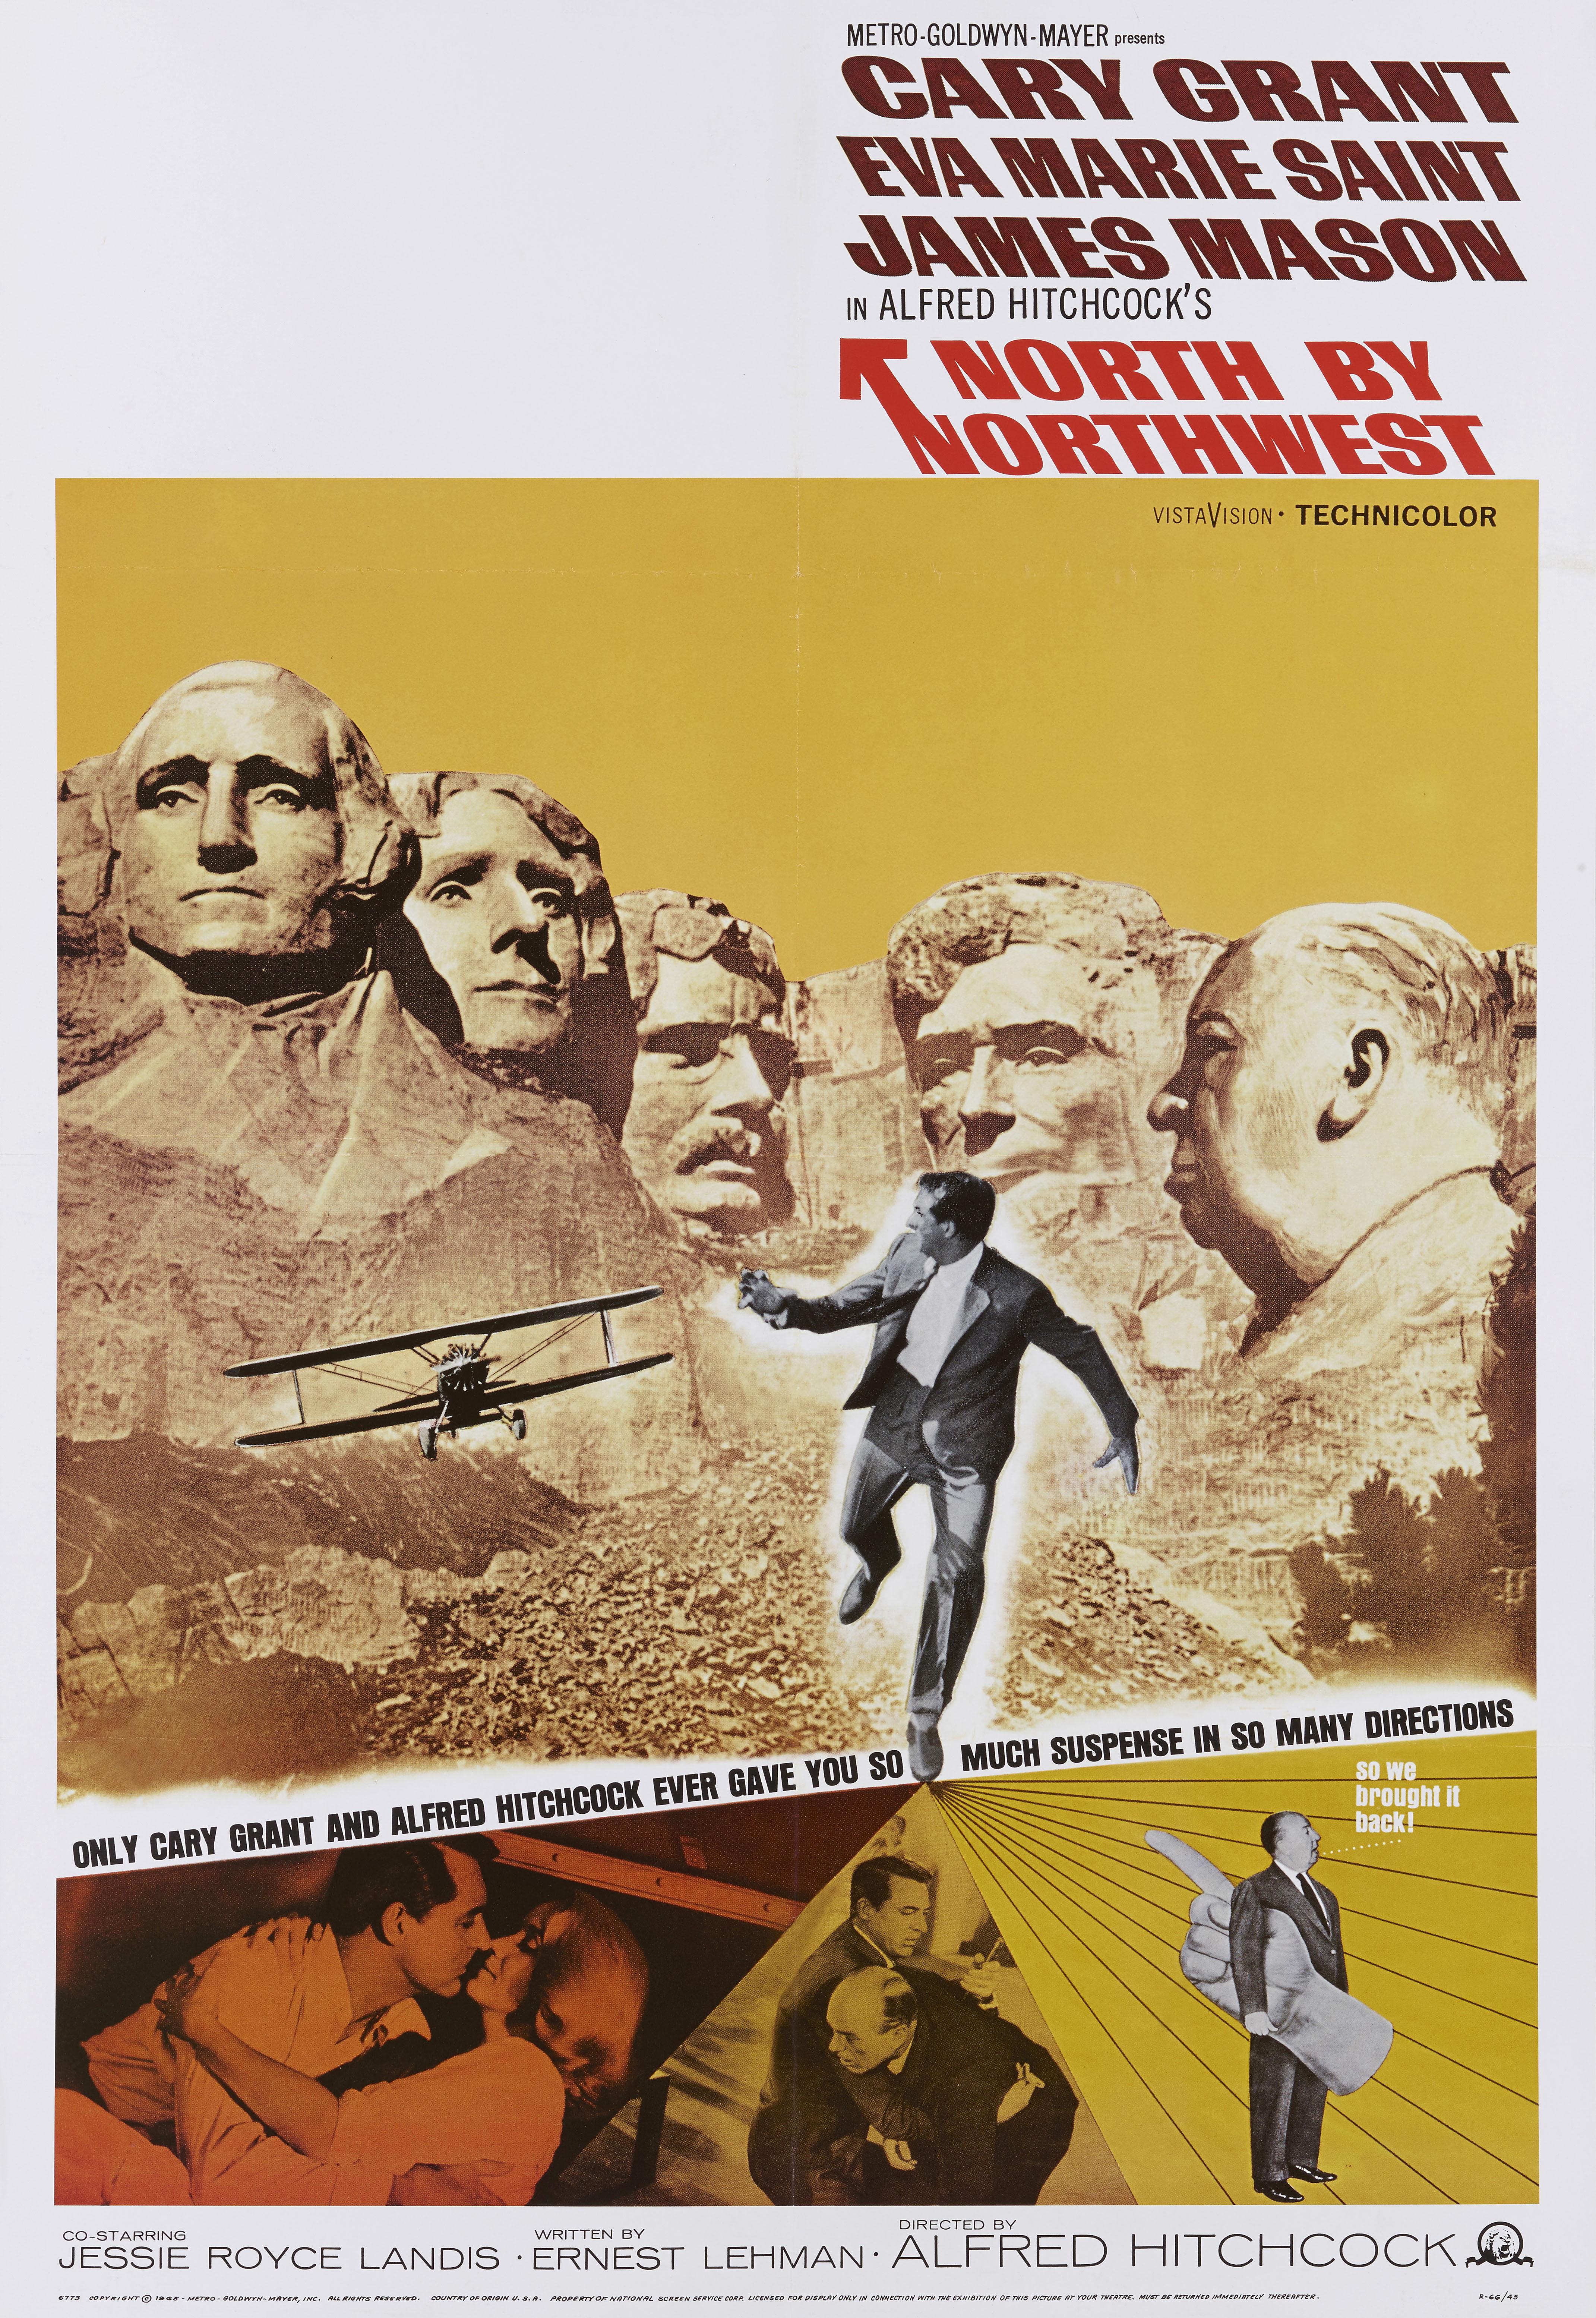 Original US film poster from (1966) 41 x 27 in. (104 x 69 cm)
This poster would have been used outside the cinema at the films Re-release.
The film came out in 1959 and due to its success it was Re-released in 1966
This poster for the Re-release